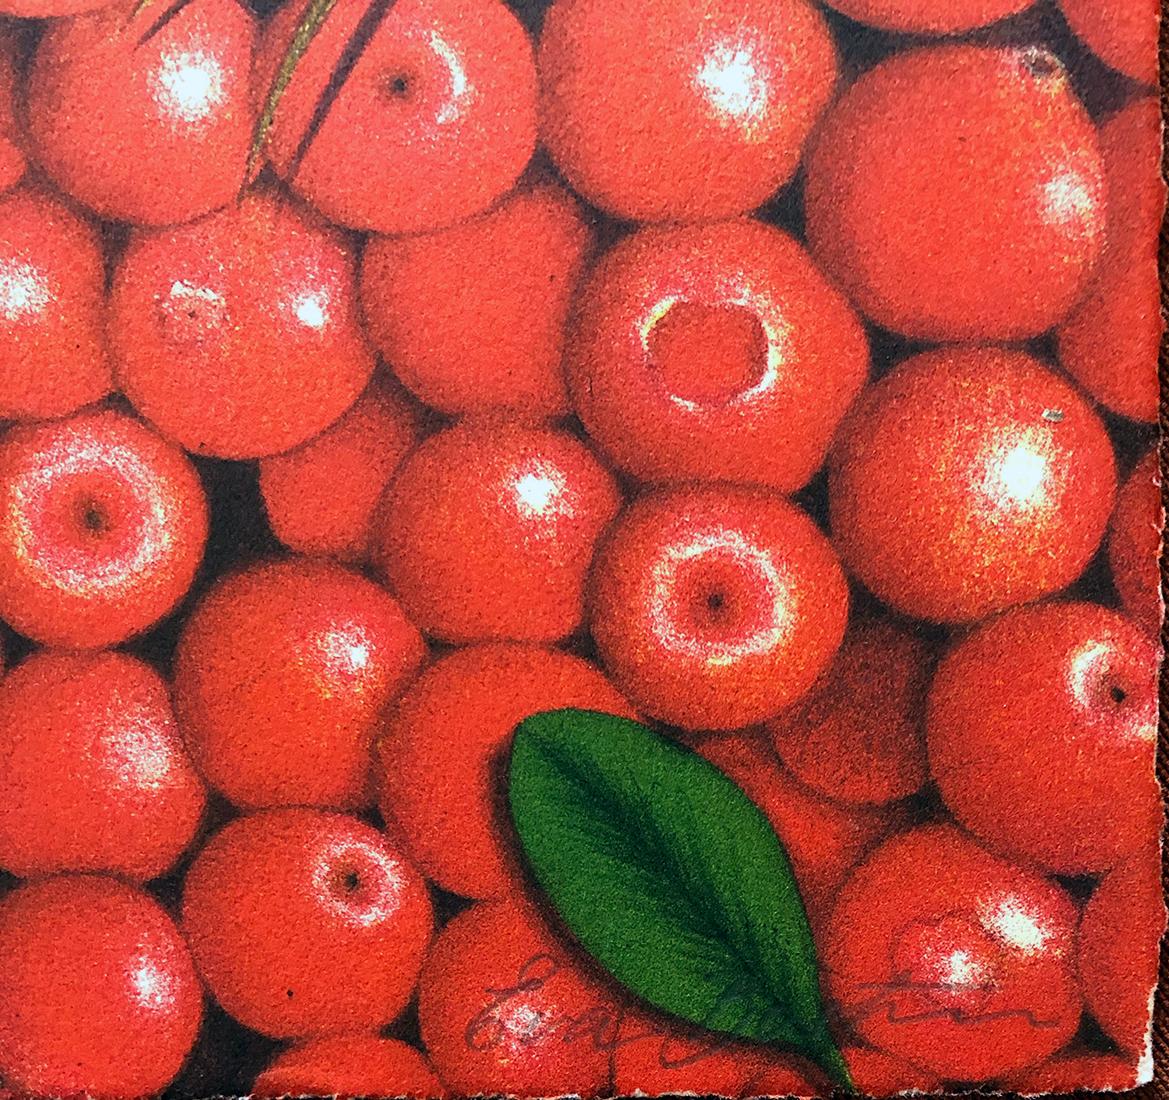 Signed and numbered lithograph from the edition of 250 .Vibrant image of blueberries.

Eva Boström was Born in 1954 in Stockholm, Sweden. Her paintings and lithographs show a sensual pleasure in the natural world, as well as a sense of humor. She